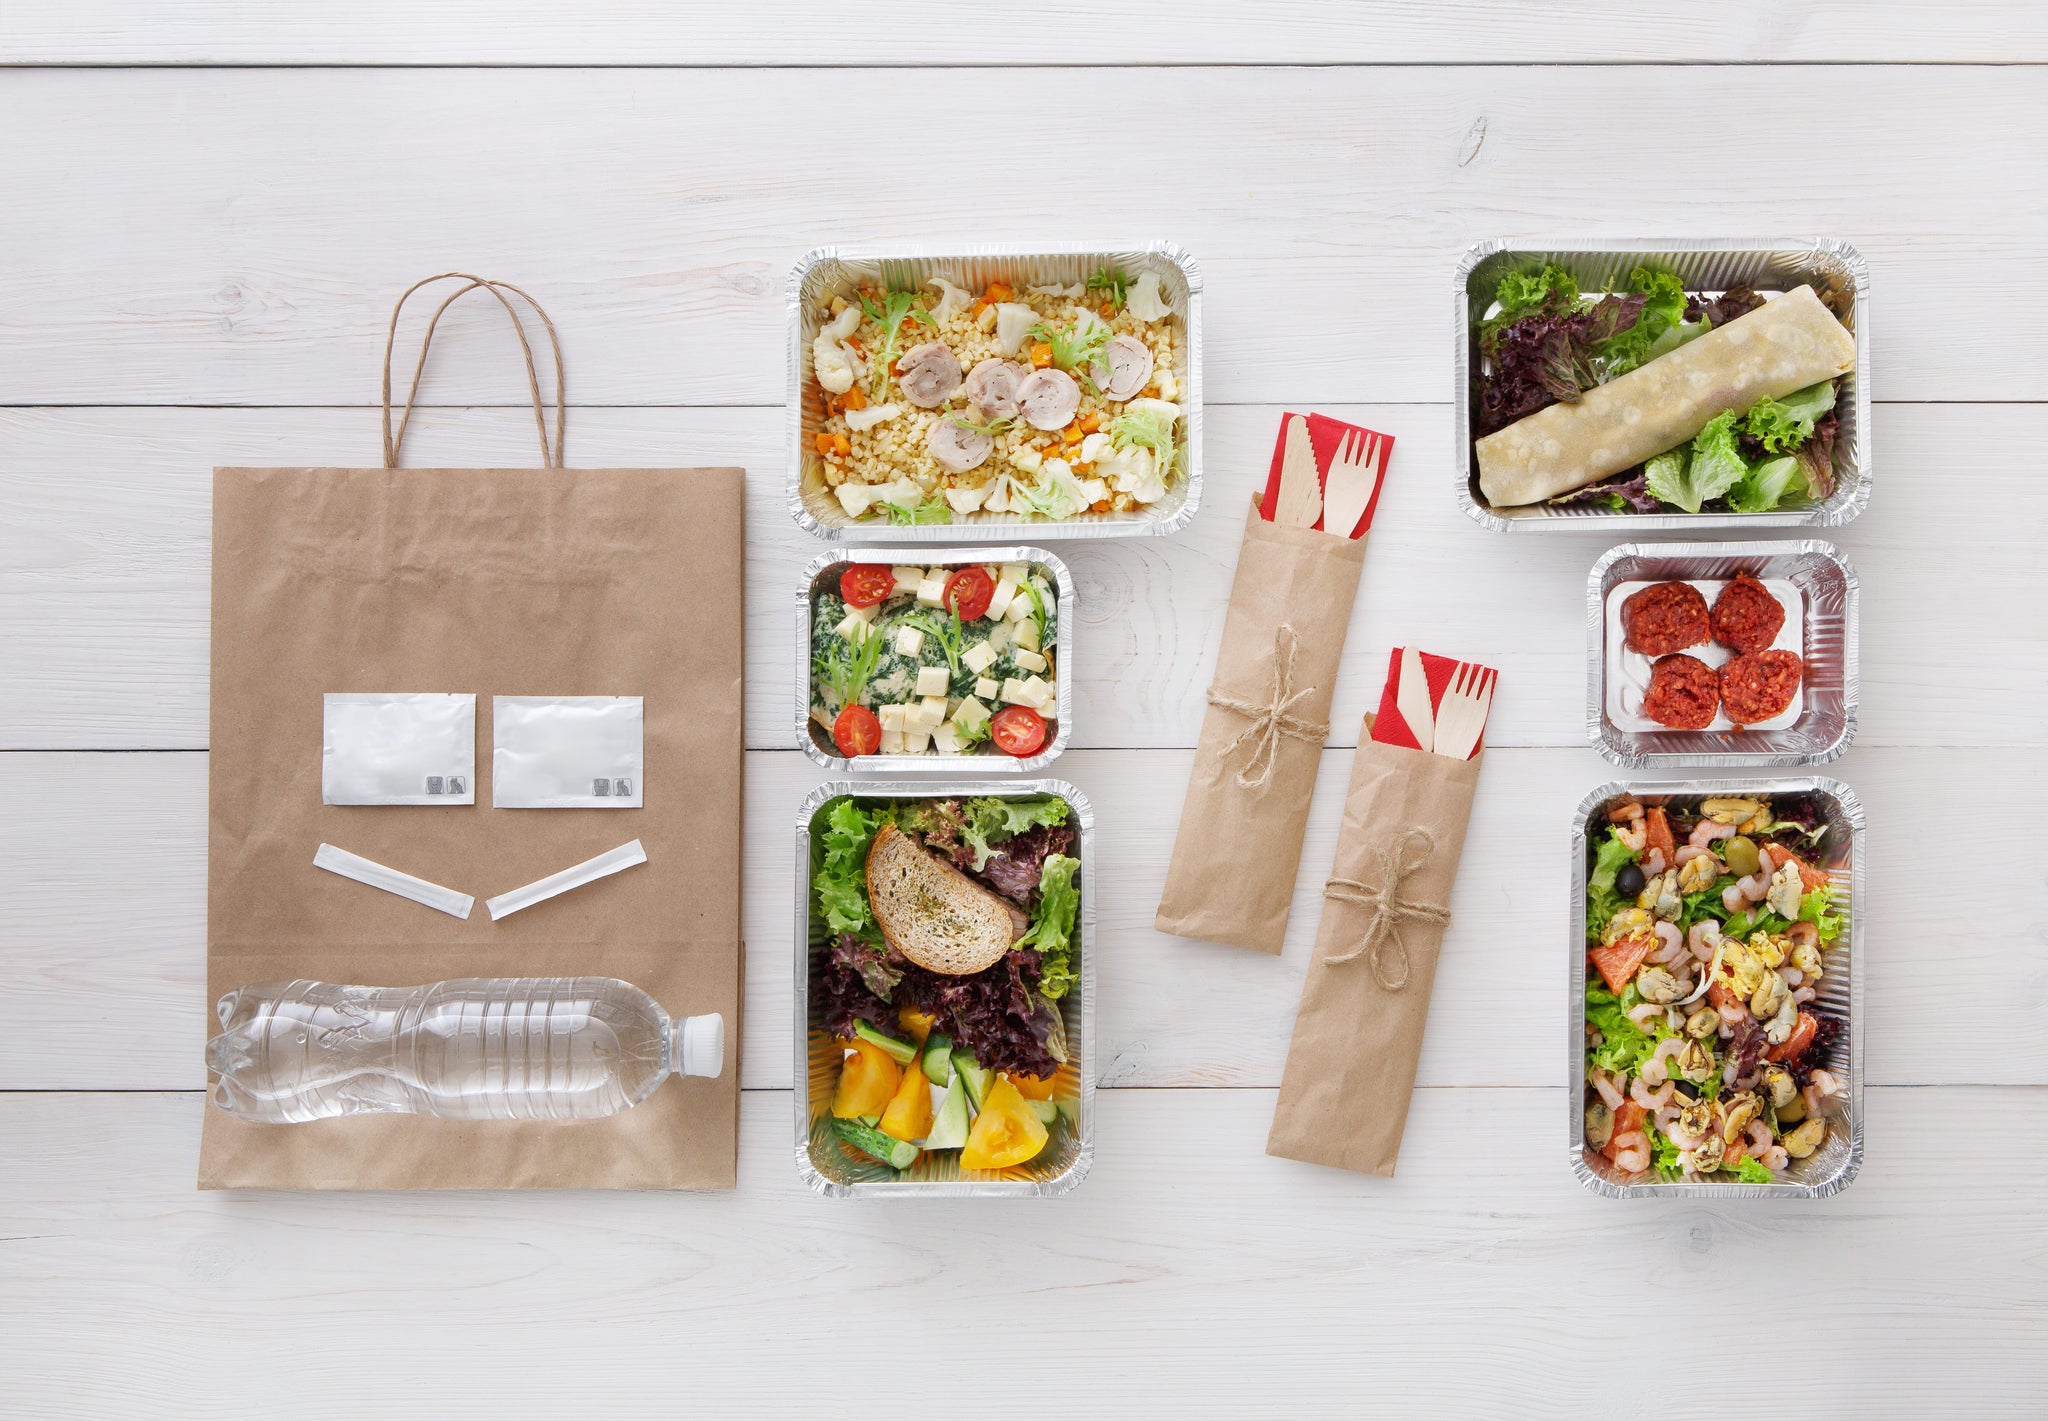 Prepared Meal Delivery: 5 Things to Look For